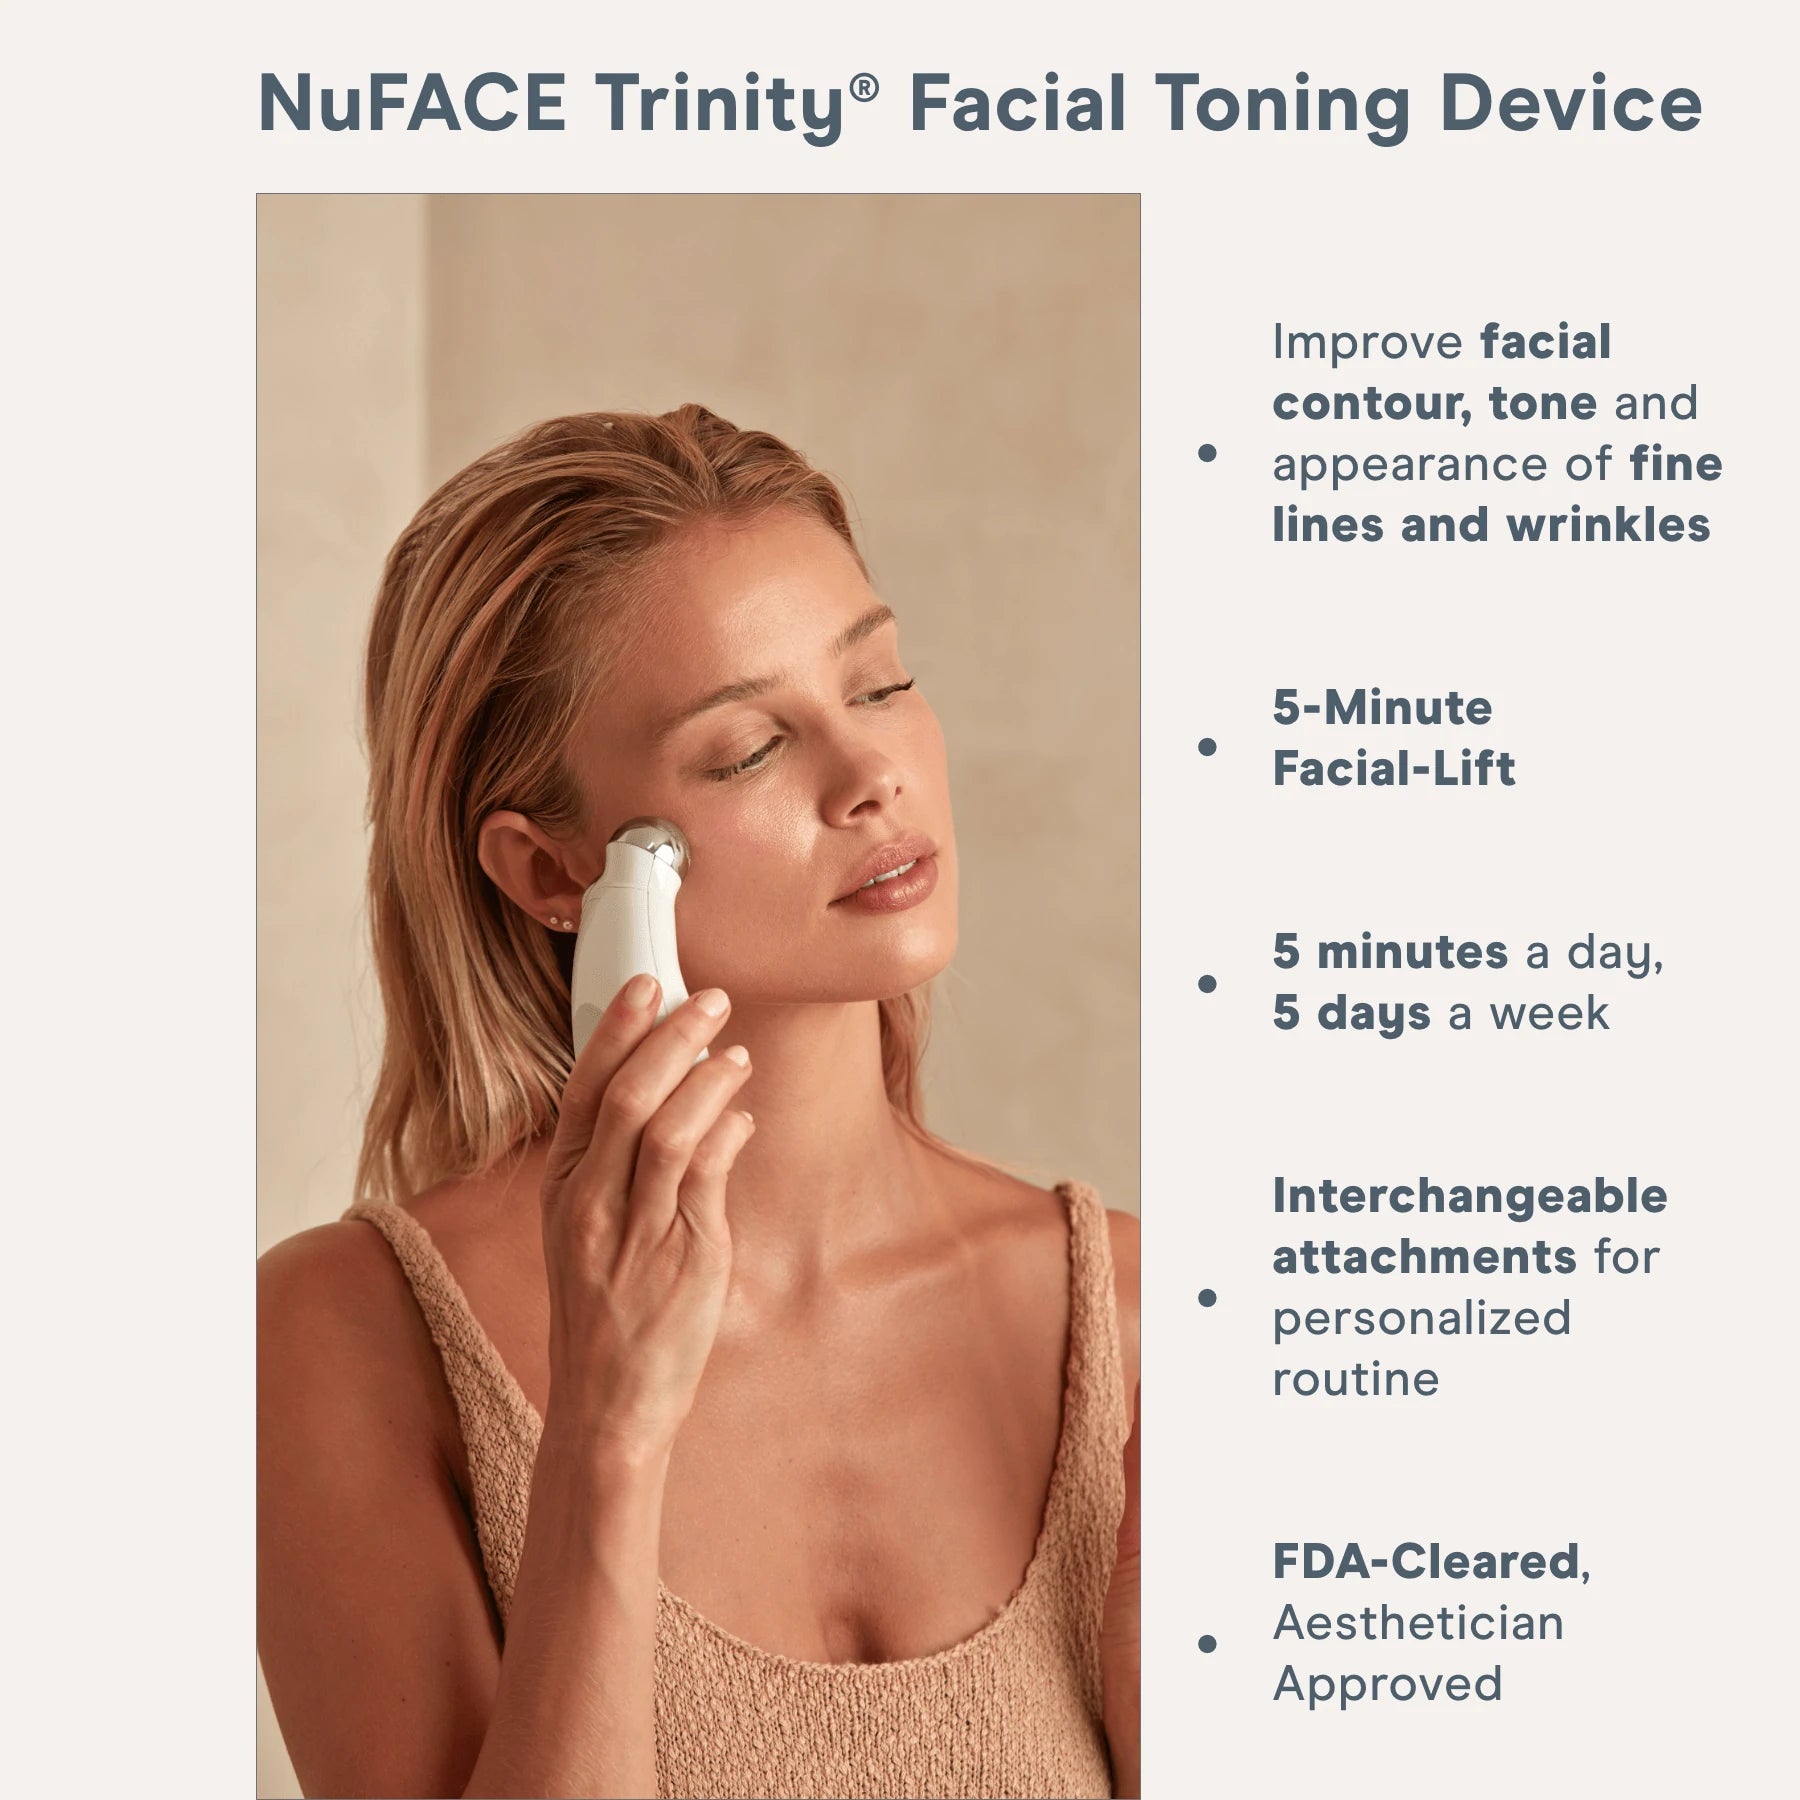 Nuface Trinity Professional Facial Toning Device (CALL FOR AVAILABILITY)